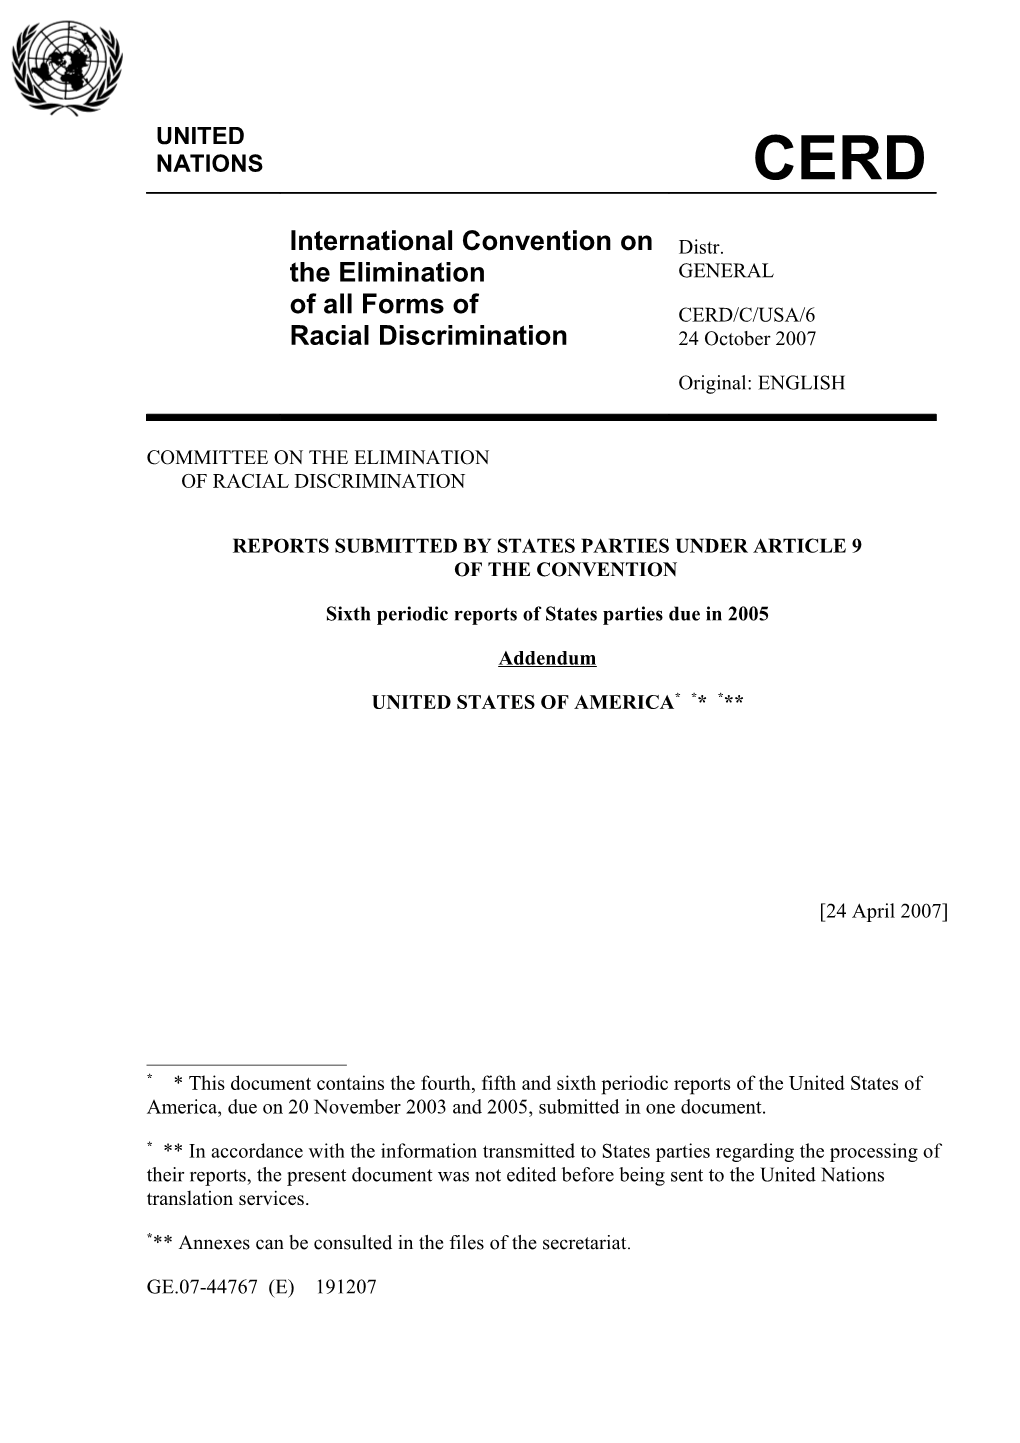 Reports Submitted by States Parties Under Article 9Of the Convention